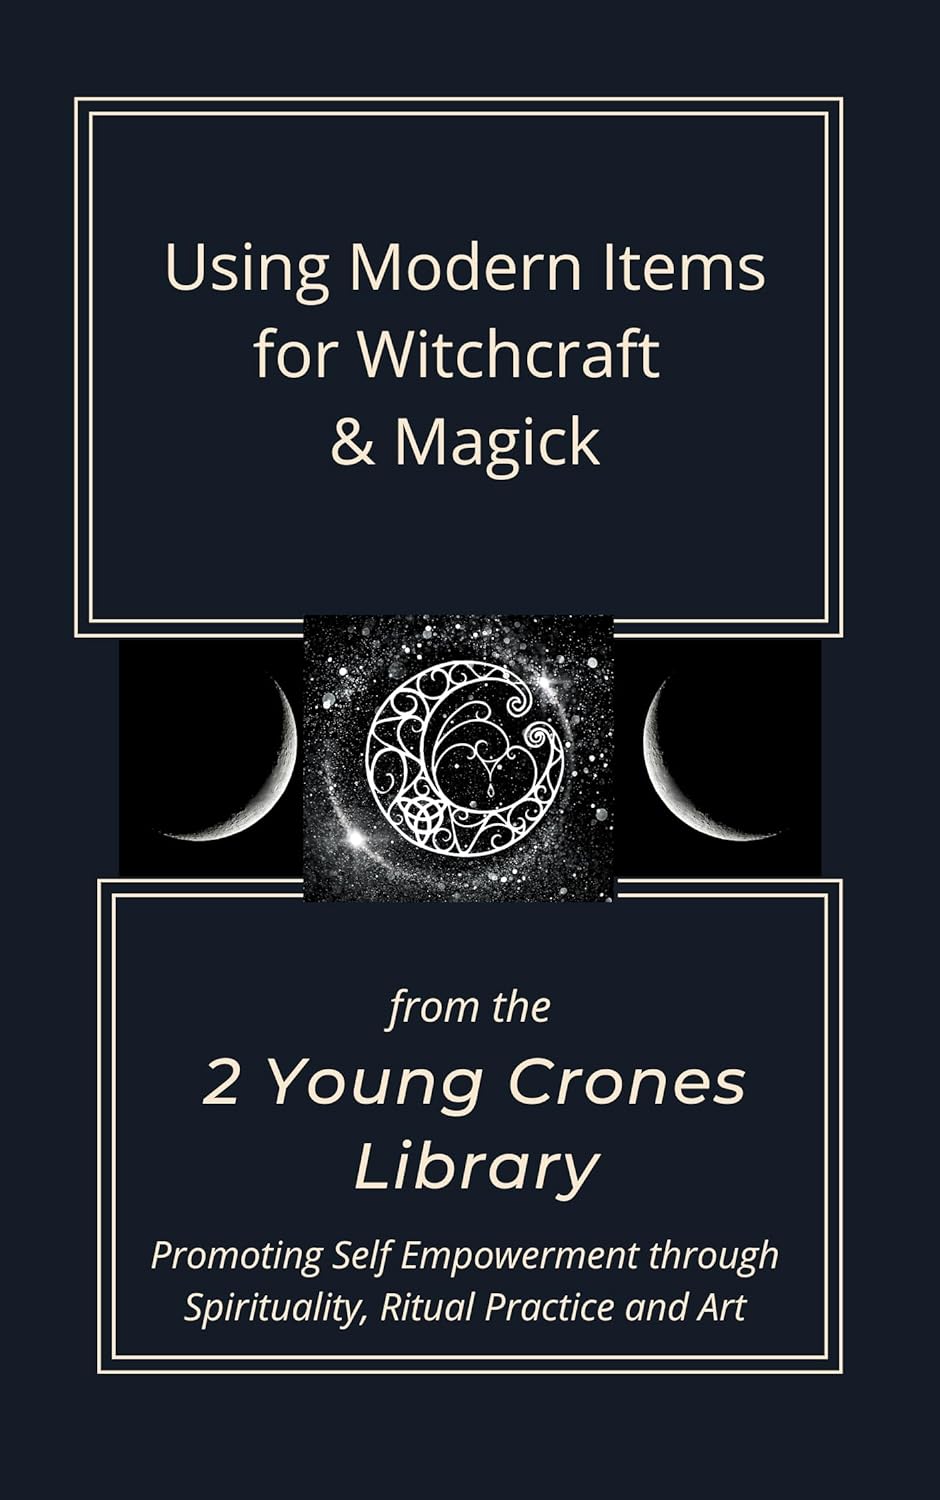 Using Modern Items for Witchcraft & Magick